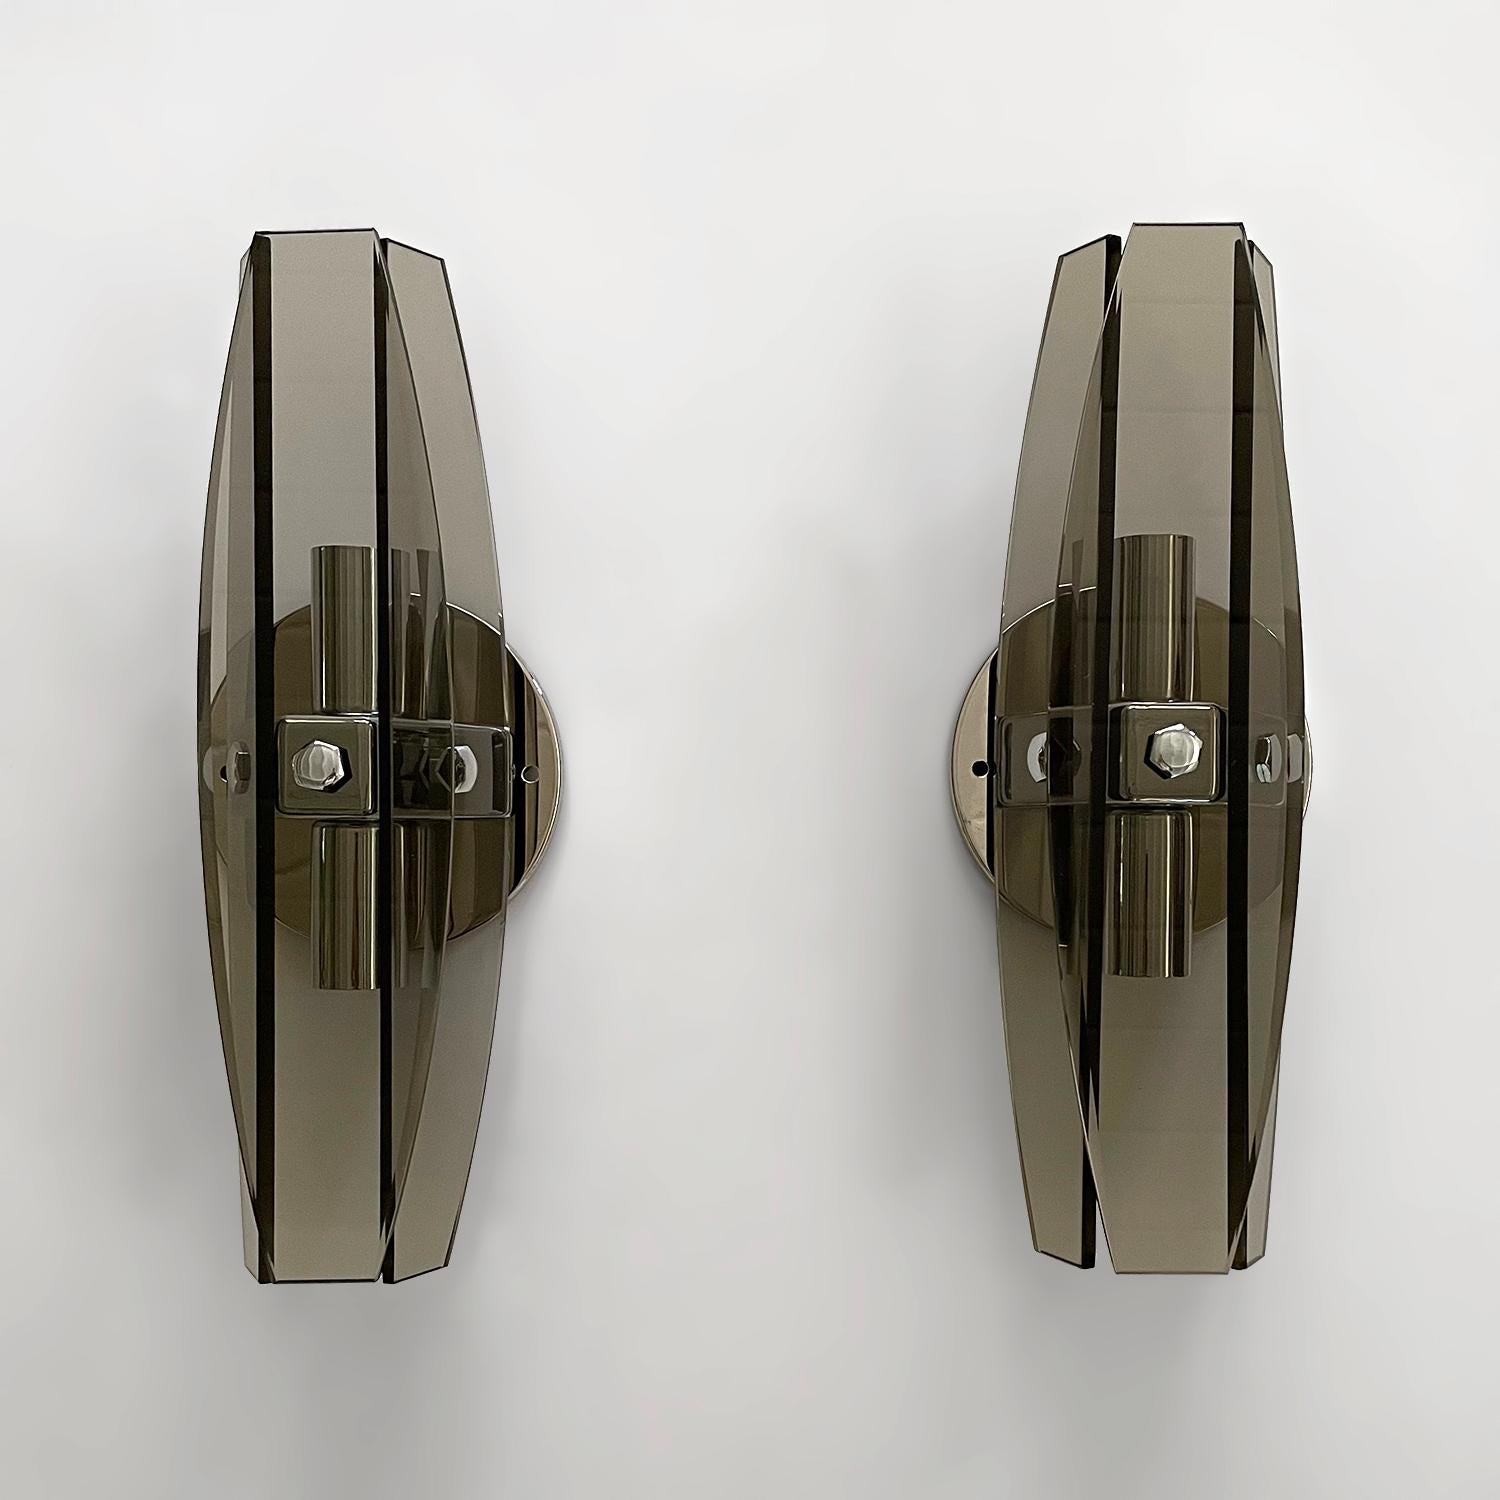 Pair of Italian Mid Century Smoked Glass Sconces
Italy, circa 1960’s
Three beveled pieces of glass are suspended to encompass the light source
The centerpiece backplate has two individual light sources
Beautifully illuminates light from the top and